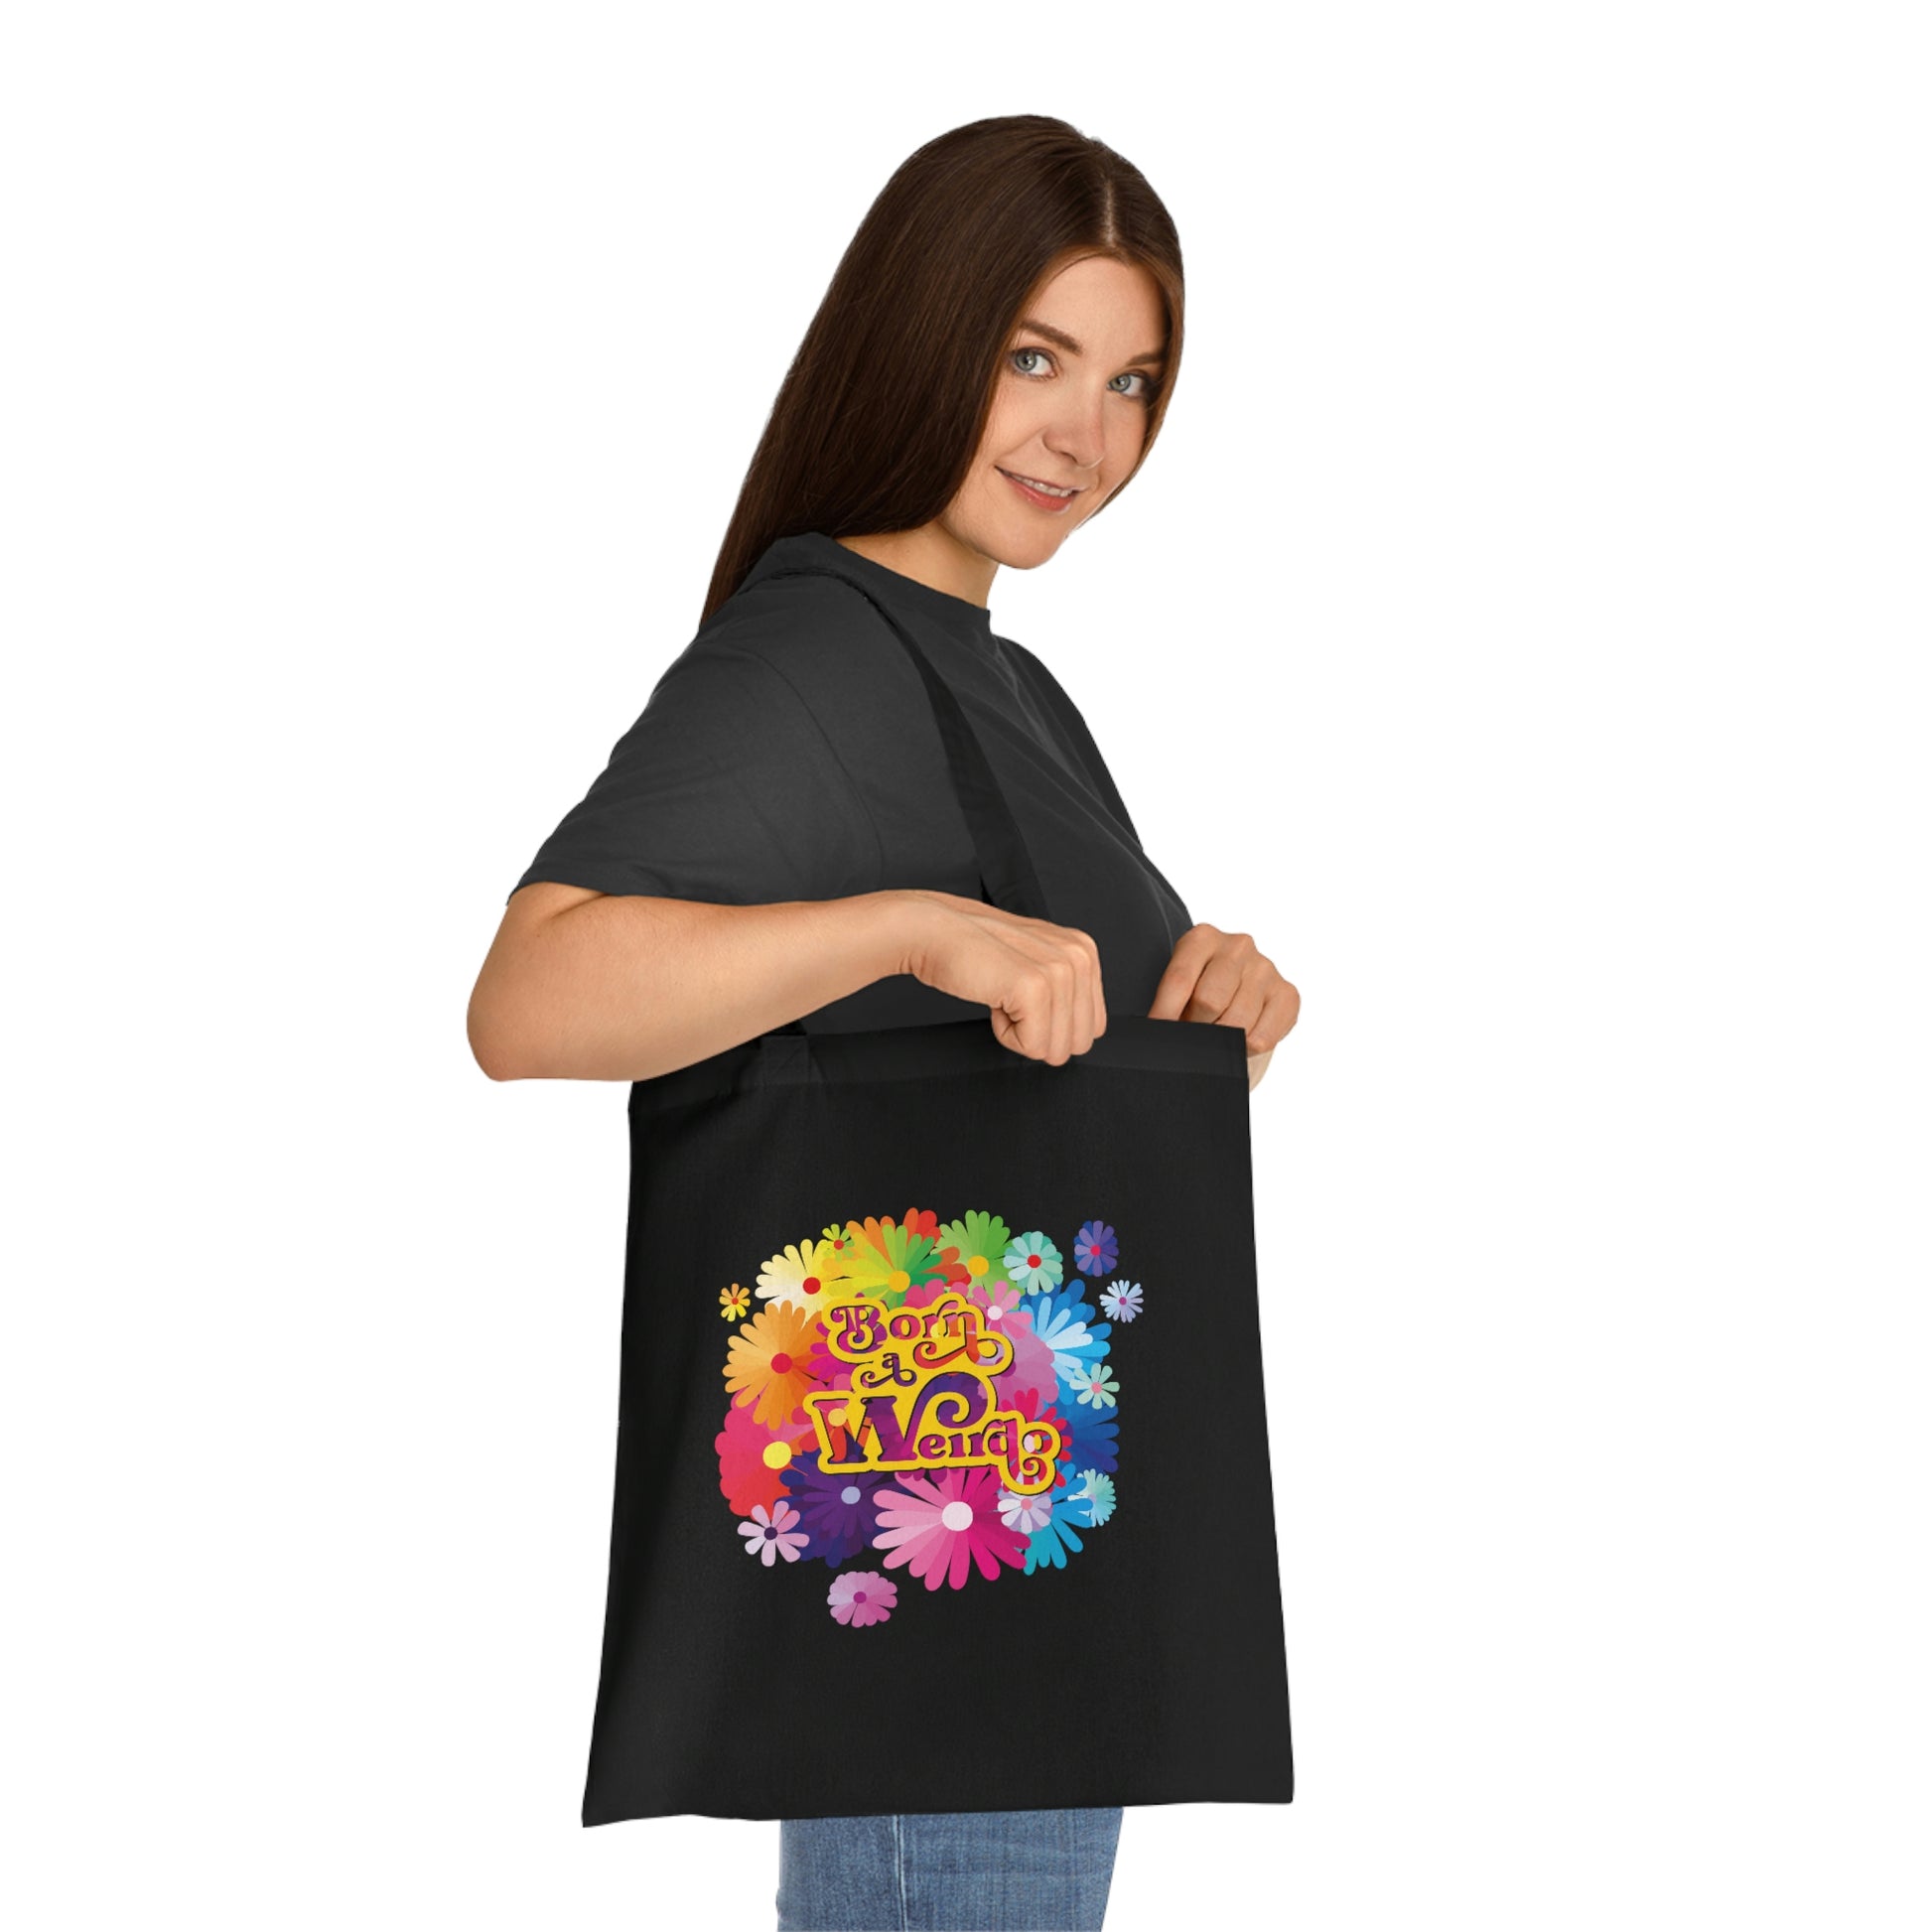 Weirdo | This black tote bag is made of 100% cotton and has our funny meme printed in colorful flowers on one side of the cotton tote bag: Born a Weirdo